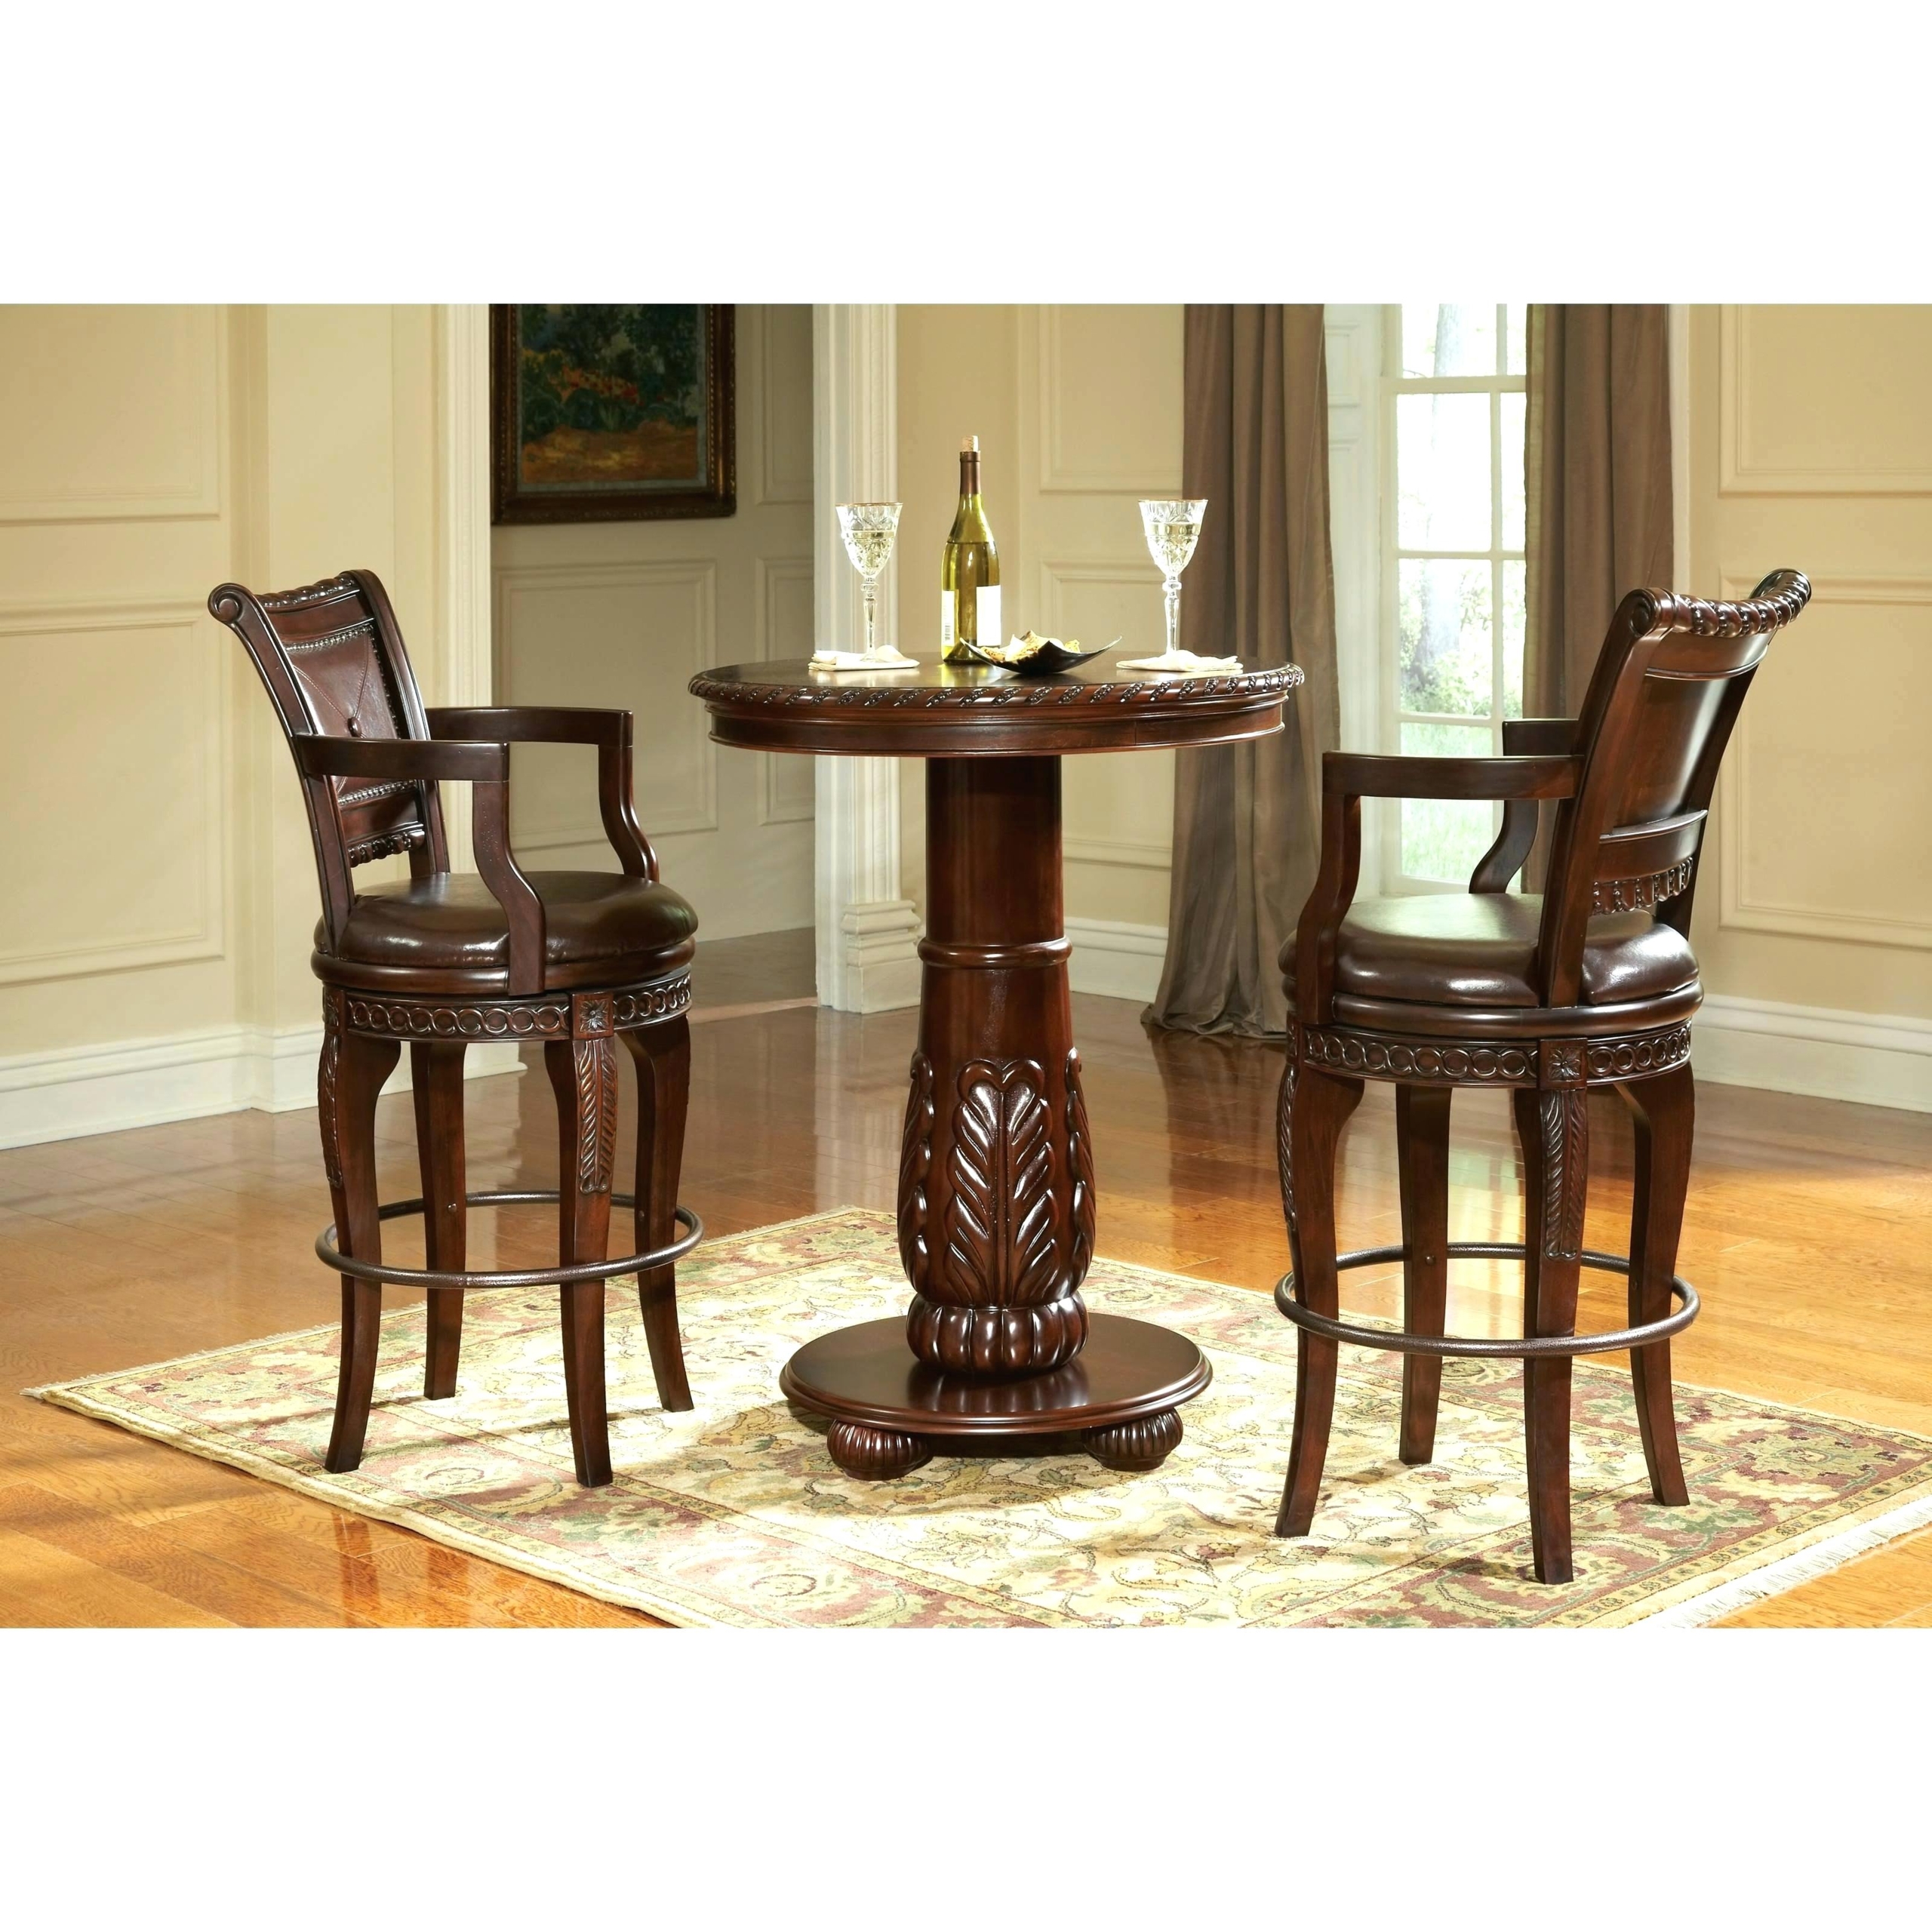 Table set in multi step rich cherry traditional indoor pub